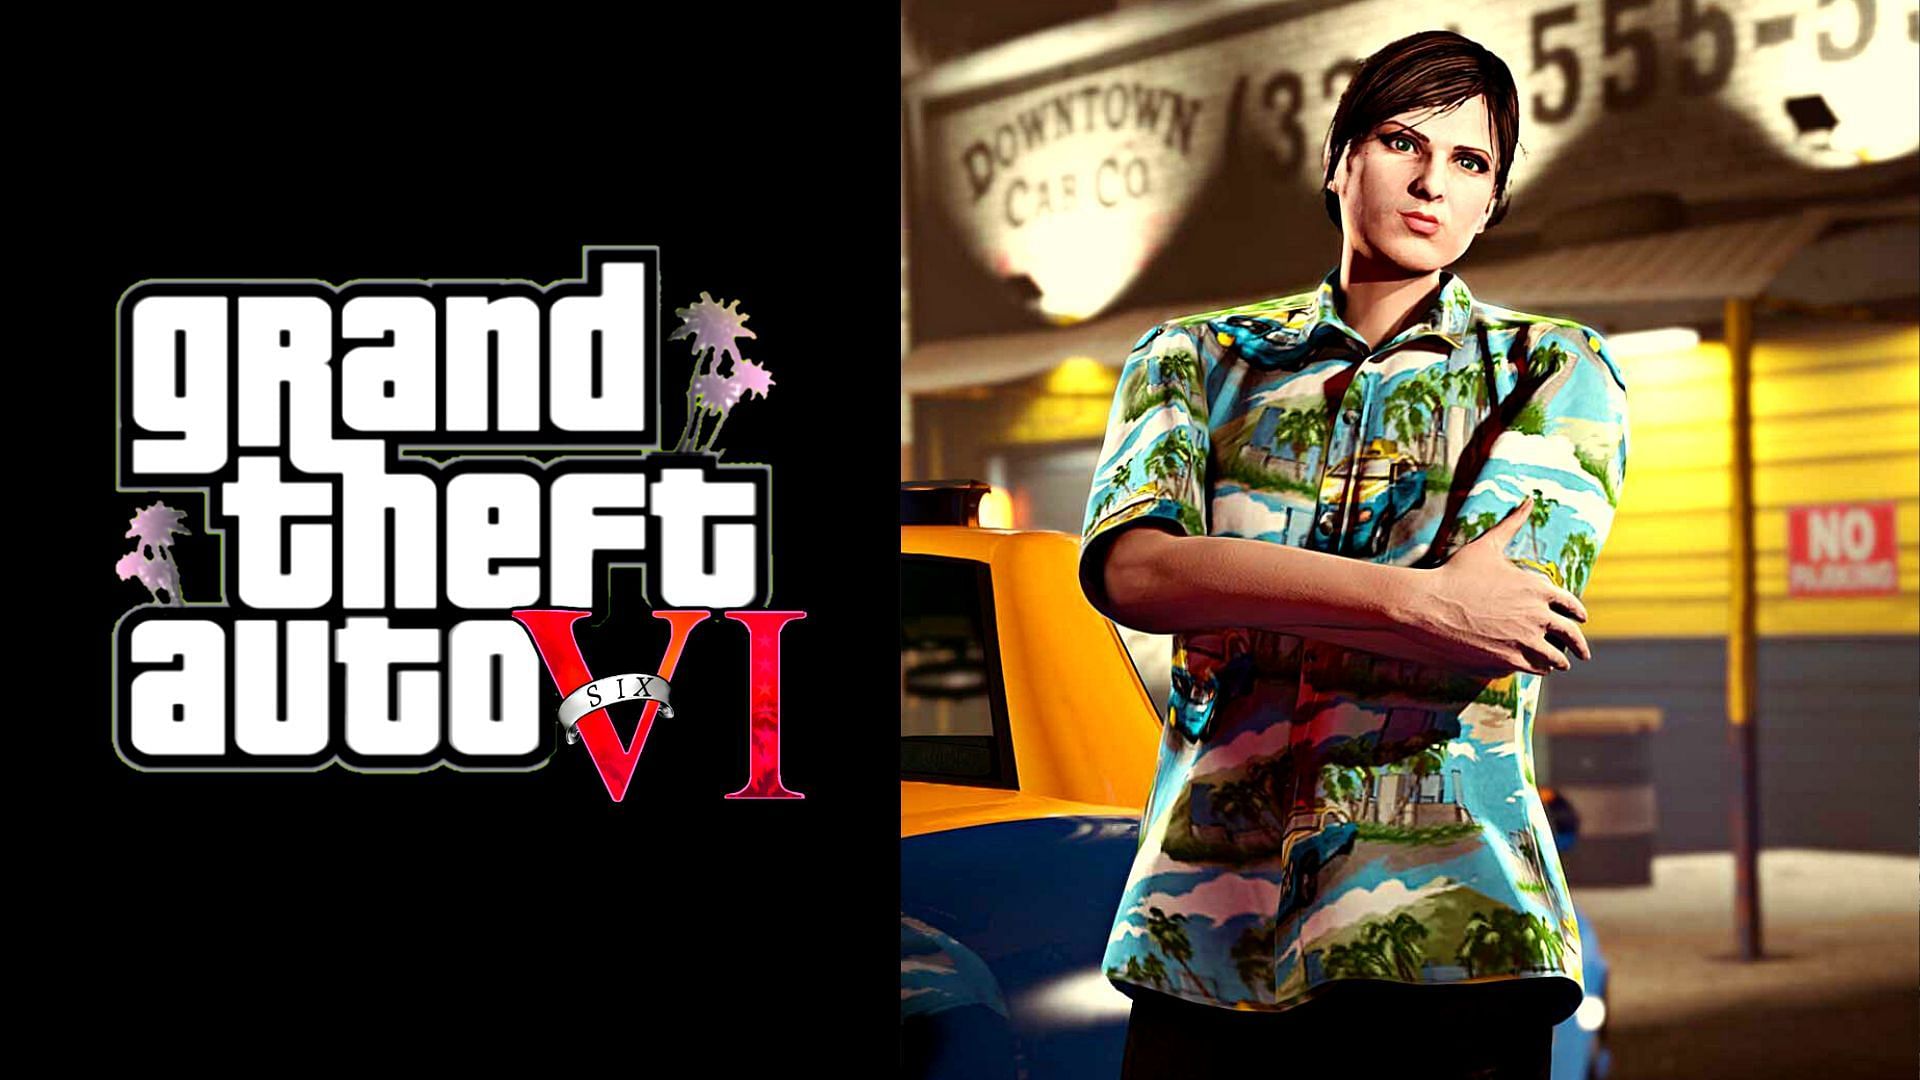 A brief about fans respond on the claim of first official GTA 6 teases in the newly released GTA Online Downtown Cab Co. shirt (Image via Sportskeeda)